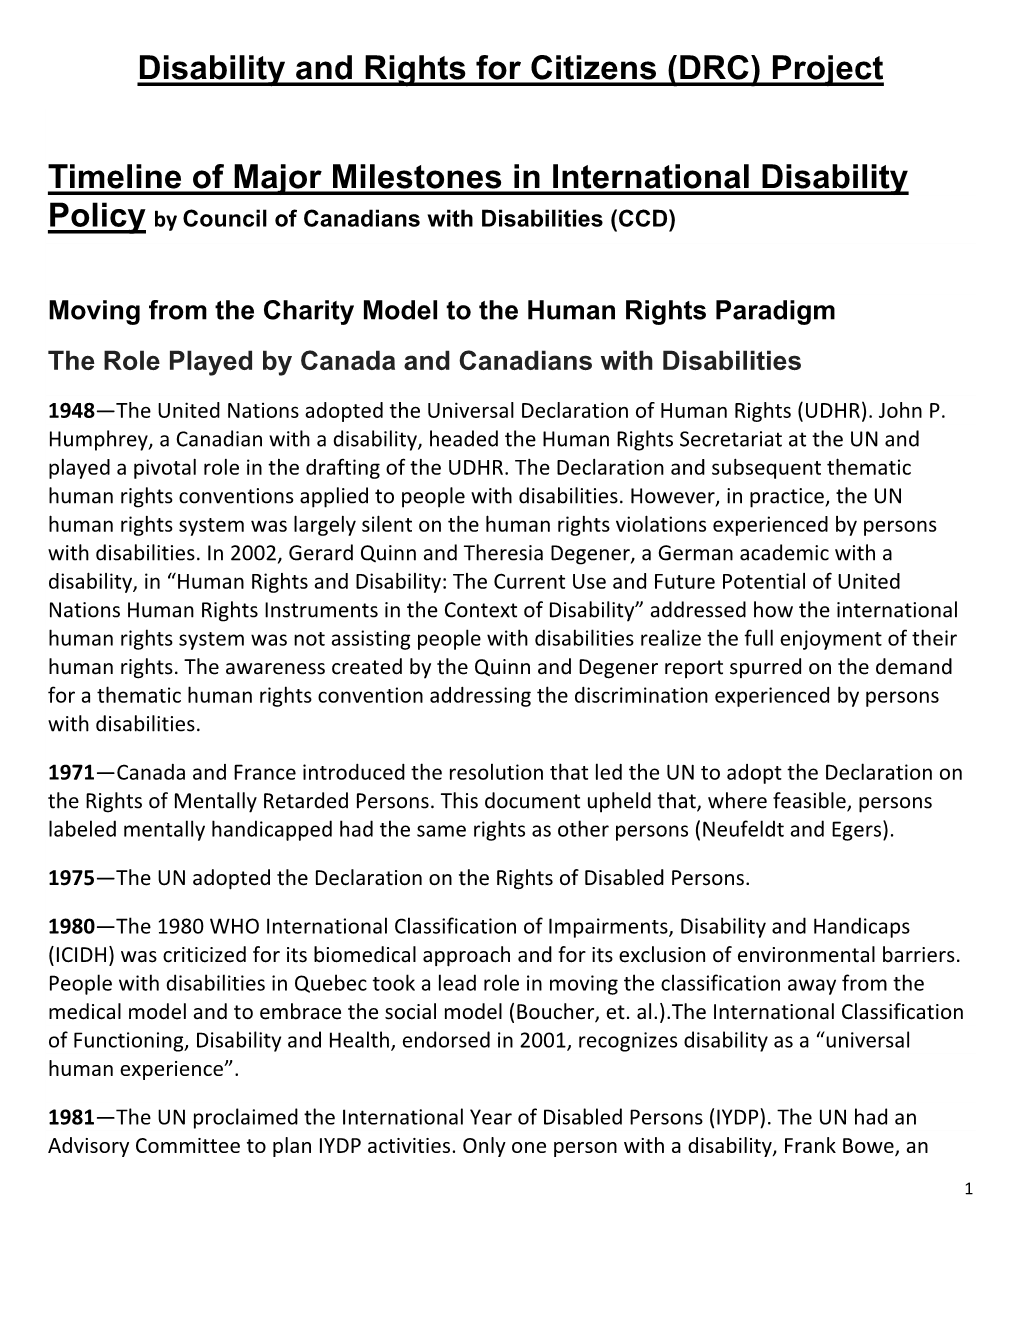 Timeline of Major Milestones in International Disability Policy by Council of Canadians with Disabilities (CCD)